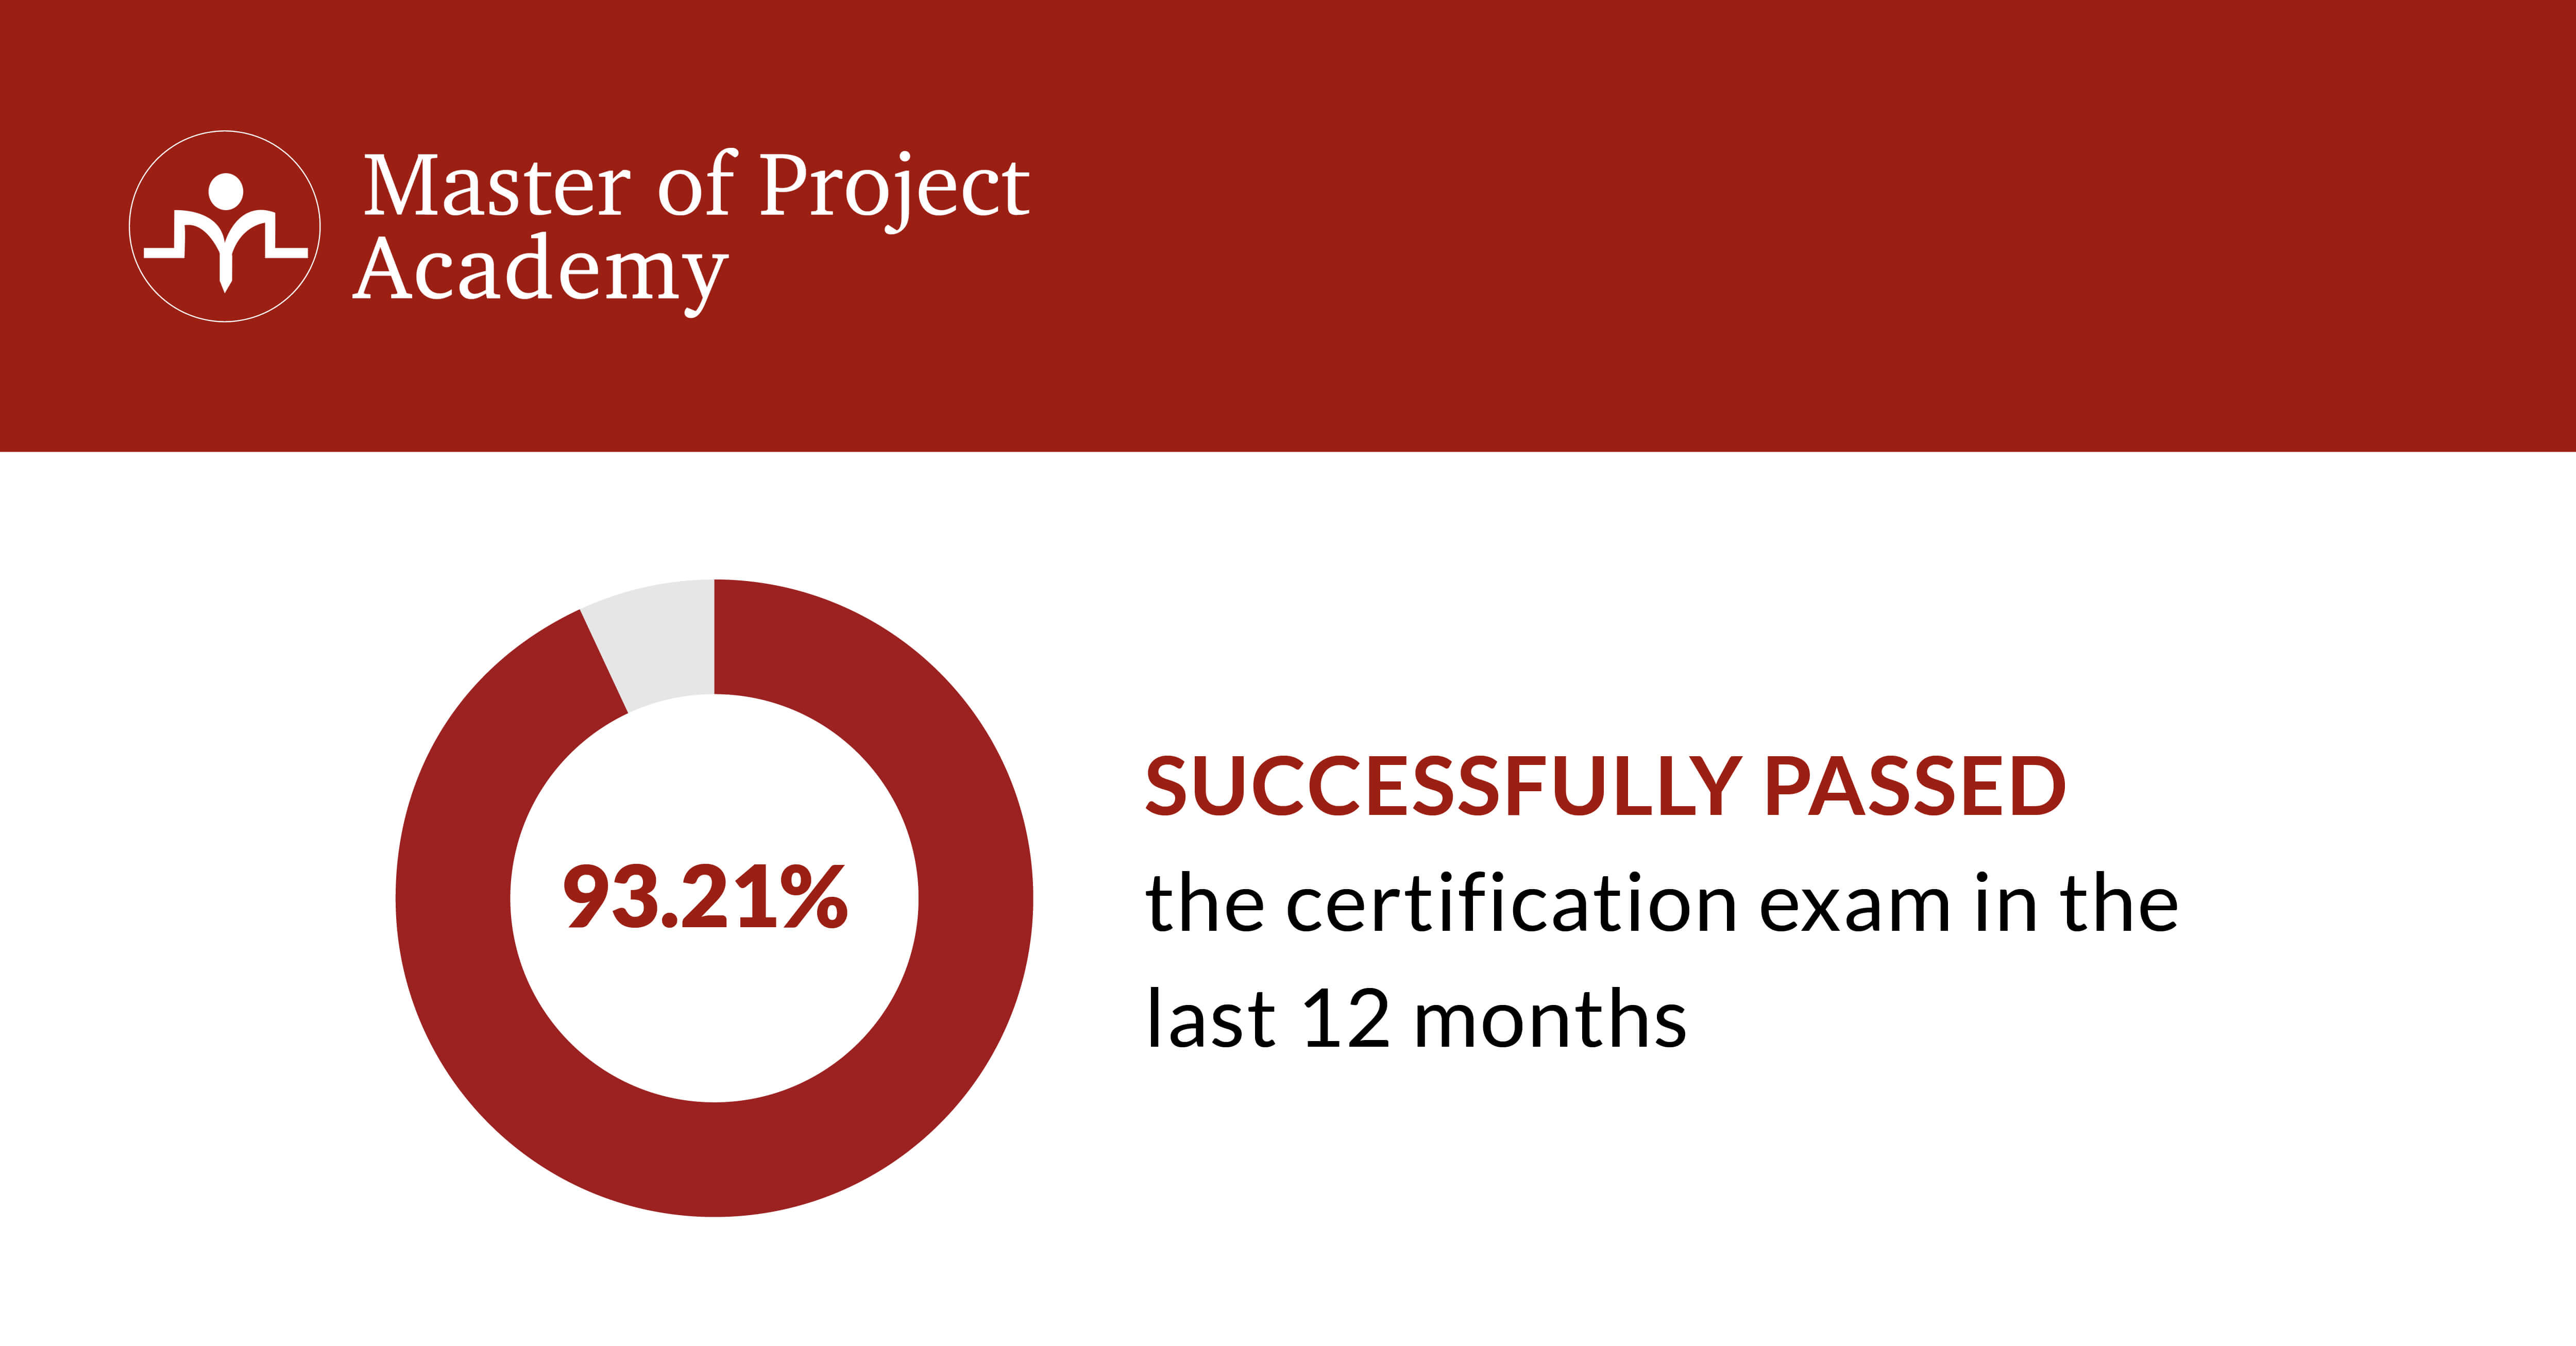 93.21% Successfully passed the certification exam in the last 12 months.